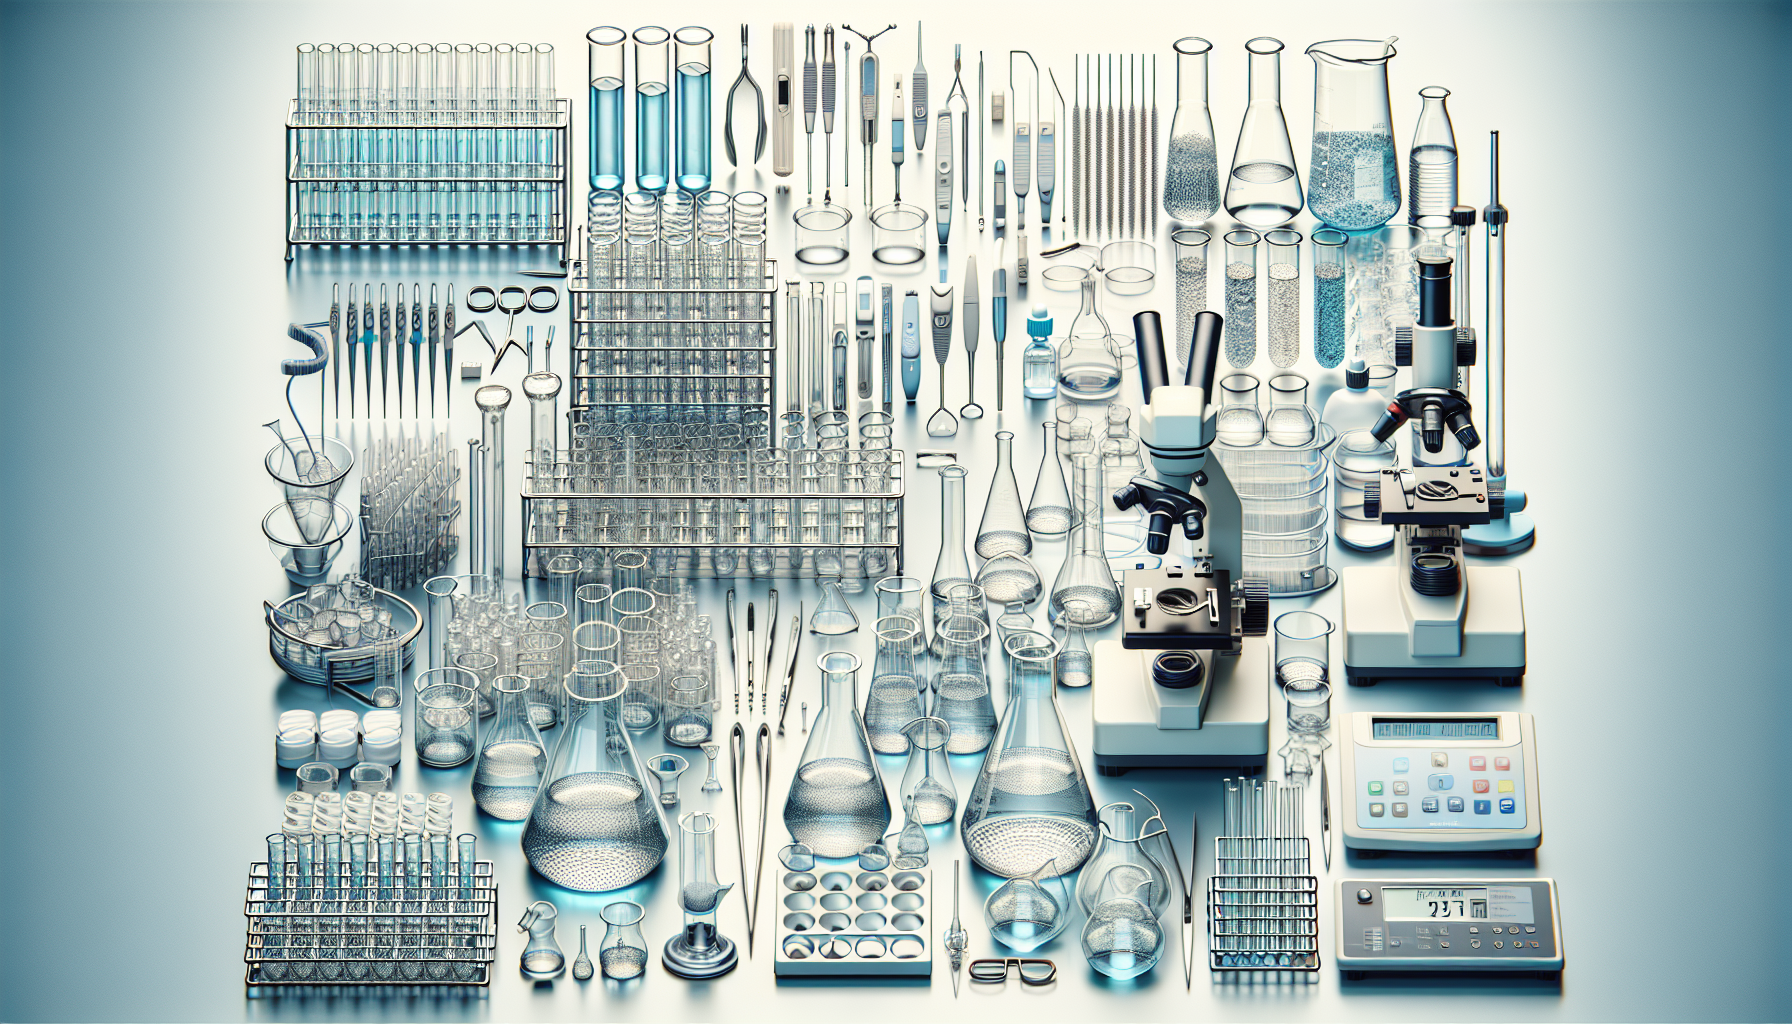 Glassware accessories and supporting equipment